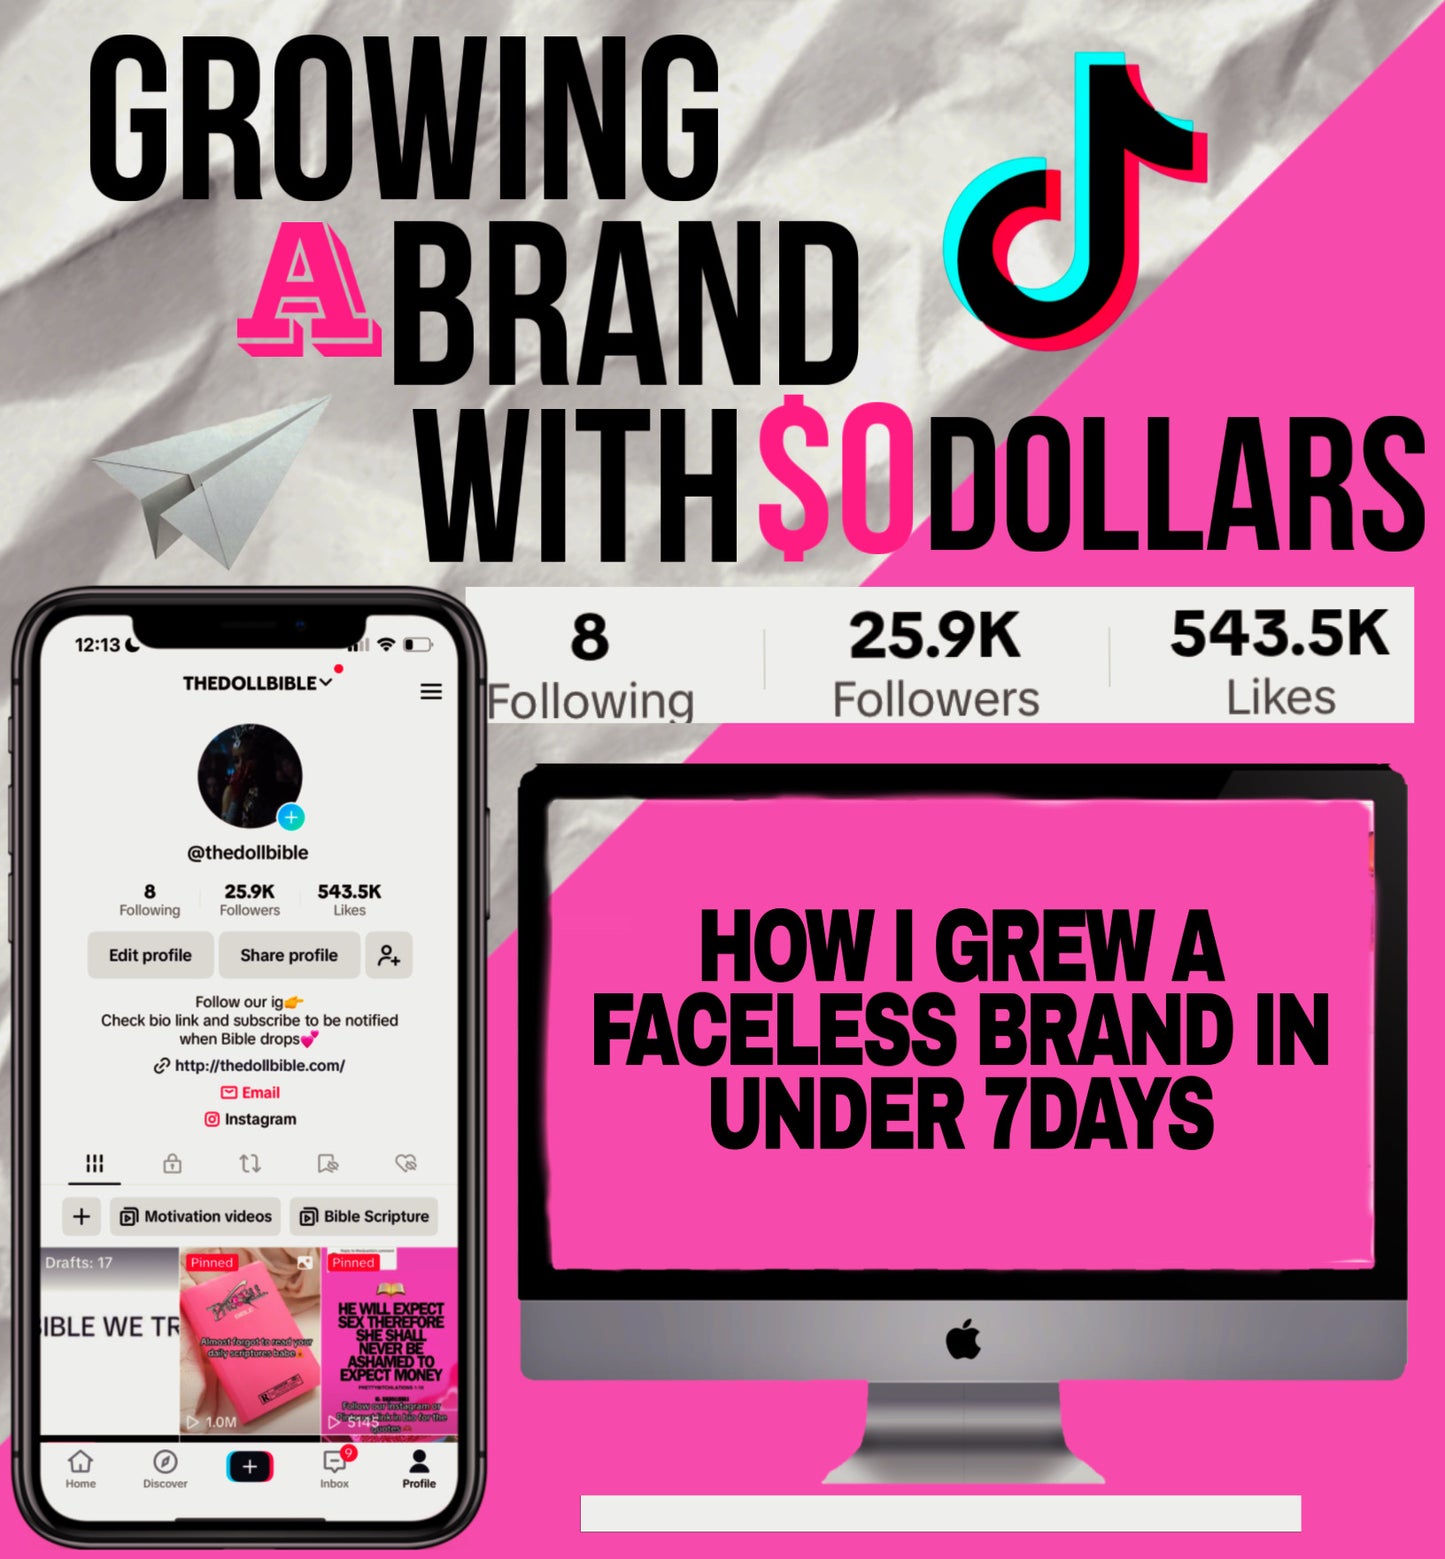 HOW TO GROW ANY BRAND WITH $0 INSTANTLY EMAILED